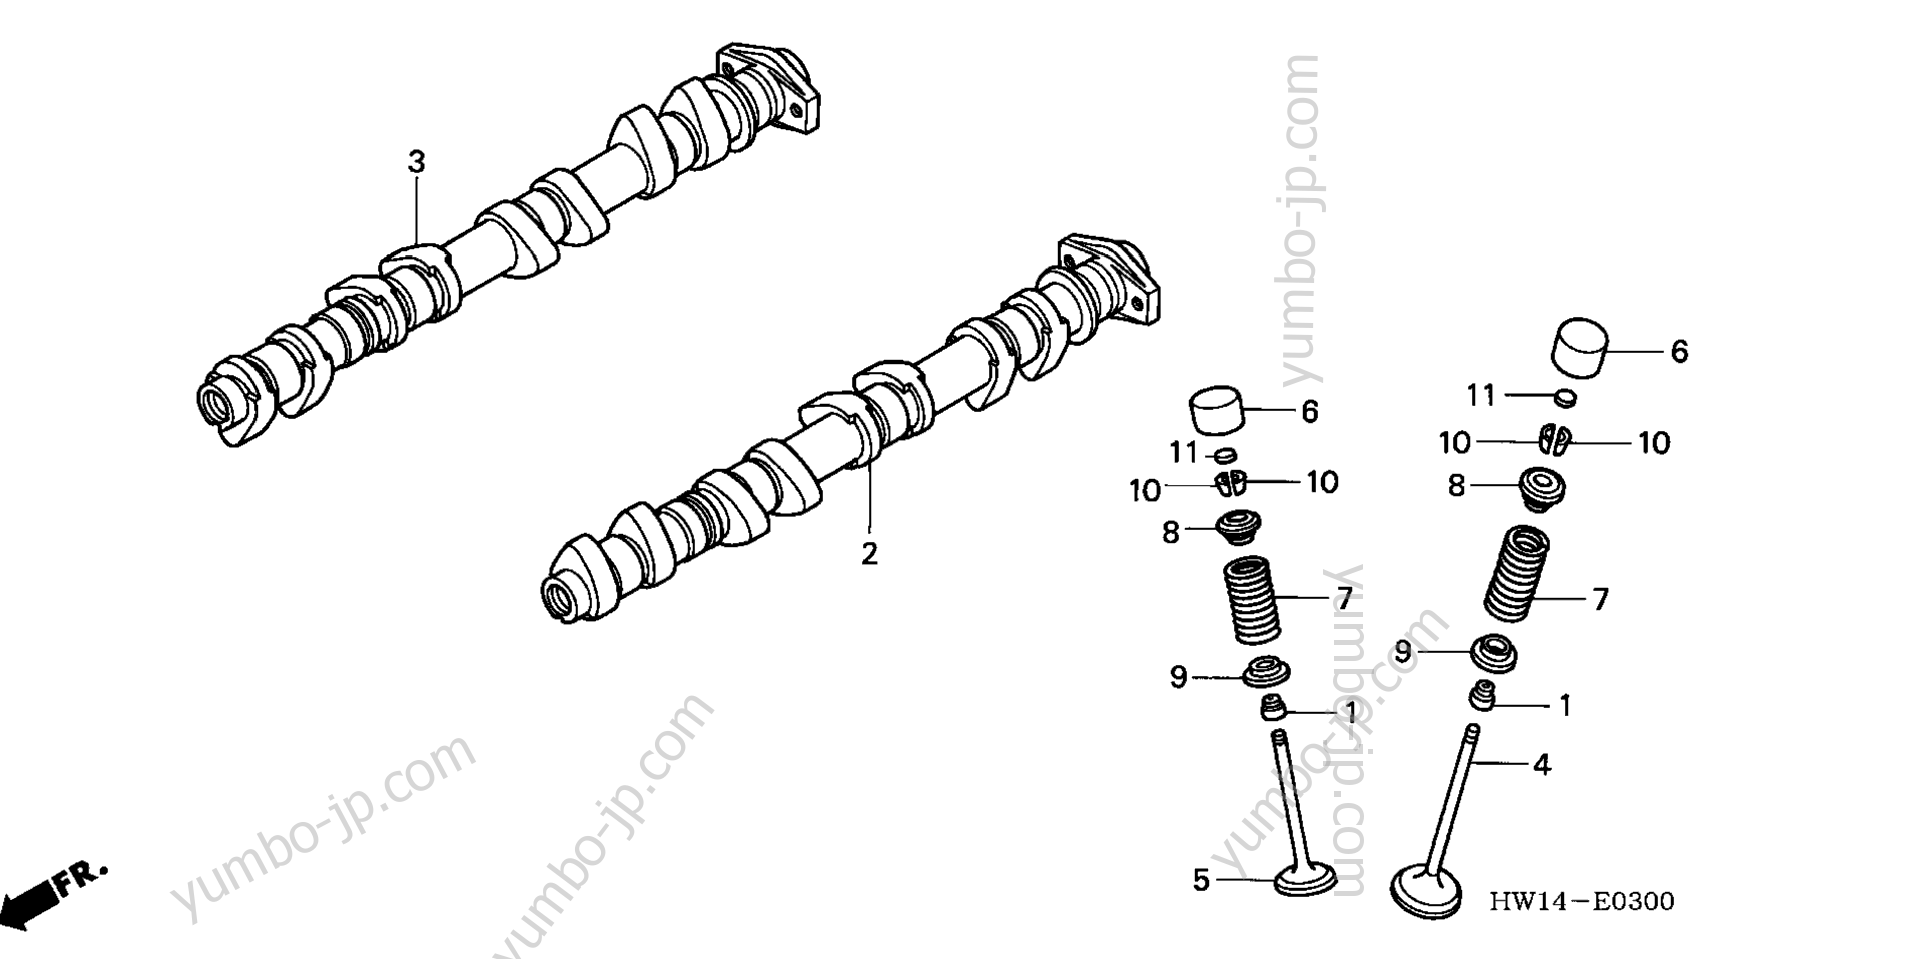 CAMSHAFT / VALVE for watercrafts HONDA ARX1200T2 A 2003 year